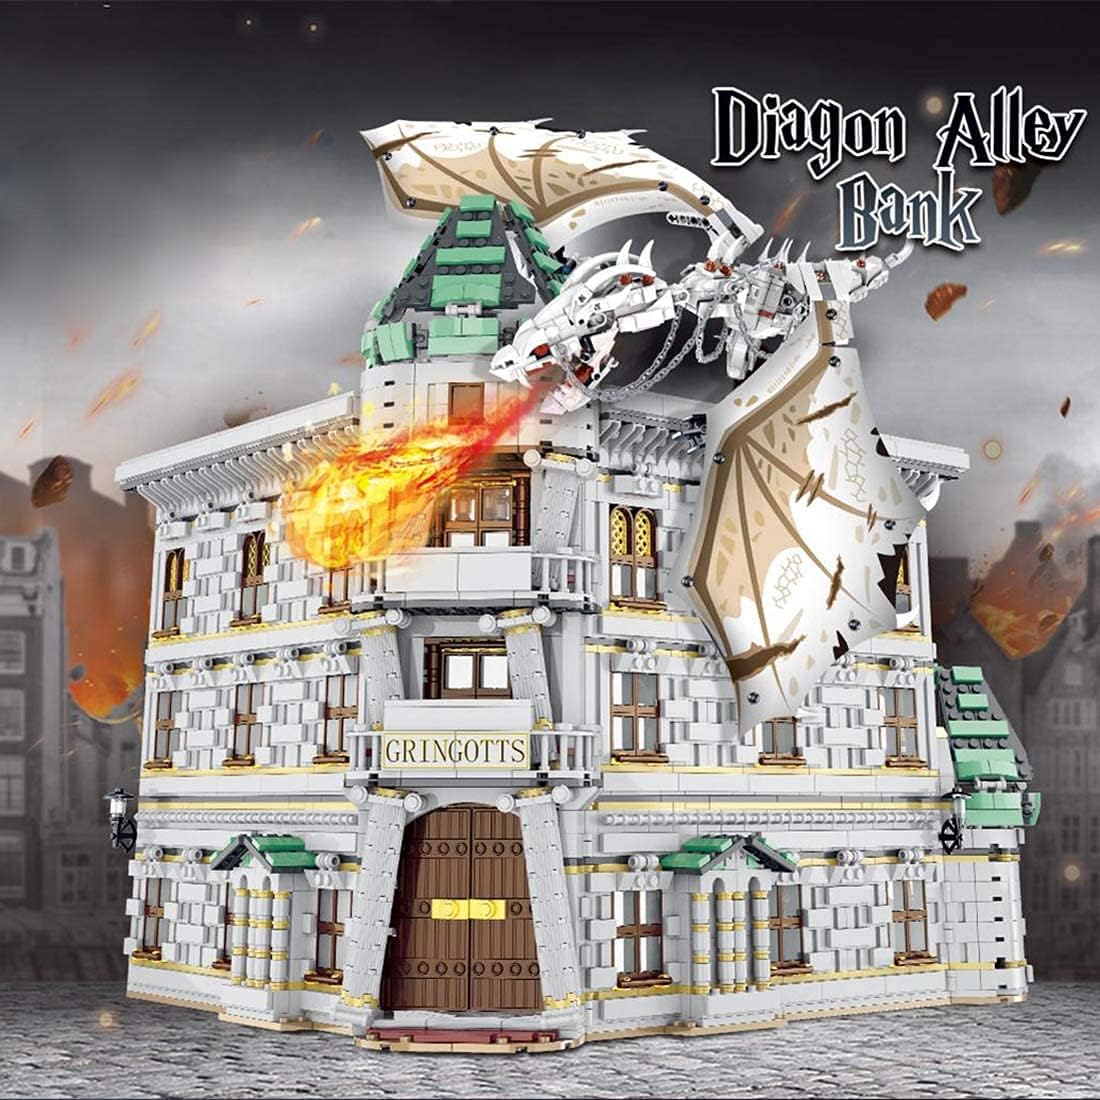 Collectible Model Set to Build,Diagon Alley Bank Model Building Kit for Harry Potter Diagon Alley, 4185 Pcs Building Block Compatible with Lego,Gift for Children Adult